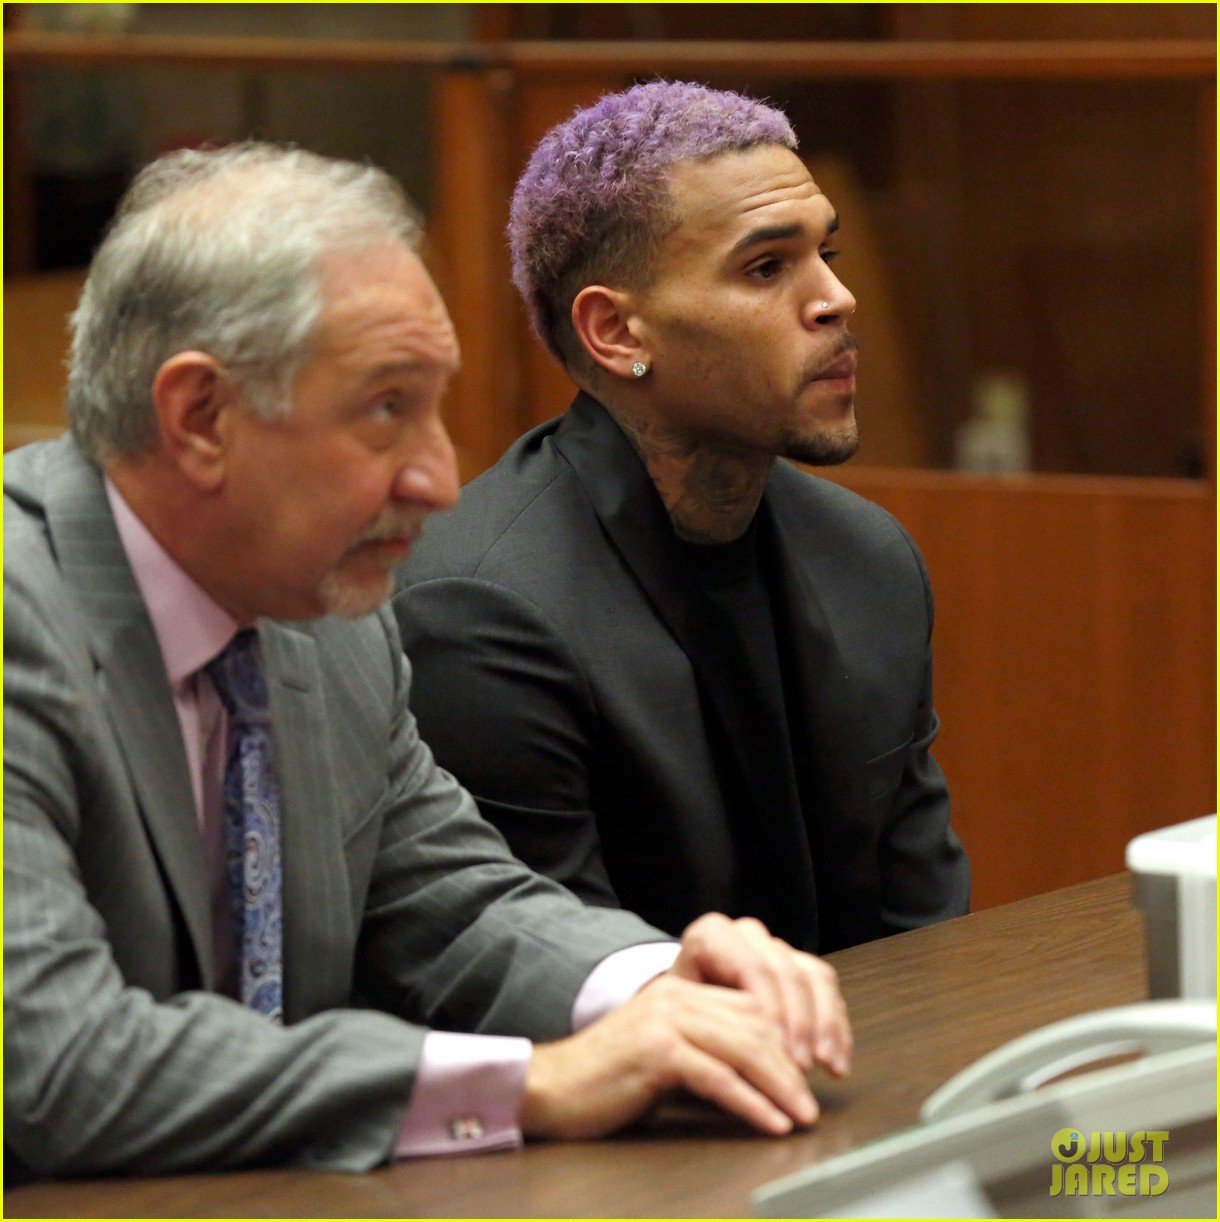 Chris Brown Sports Purple Hair For Probation Ending Court Appearance: Photo  3330709 | Chris Brown Pictures | Just Jared